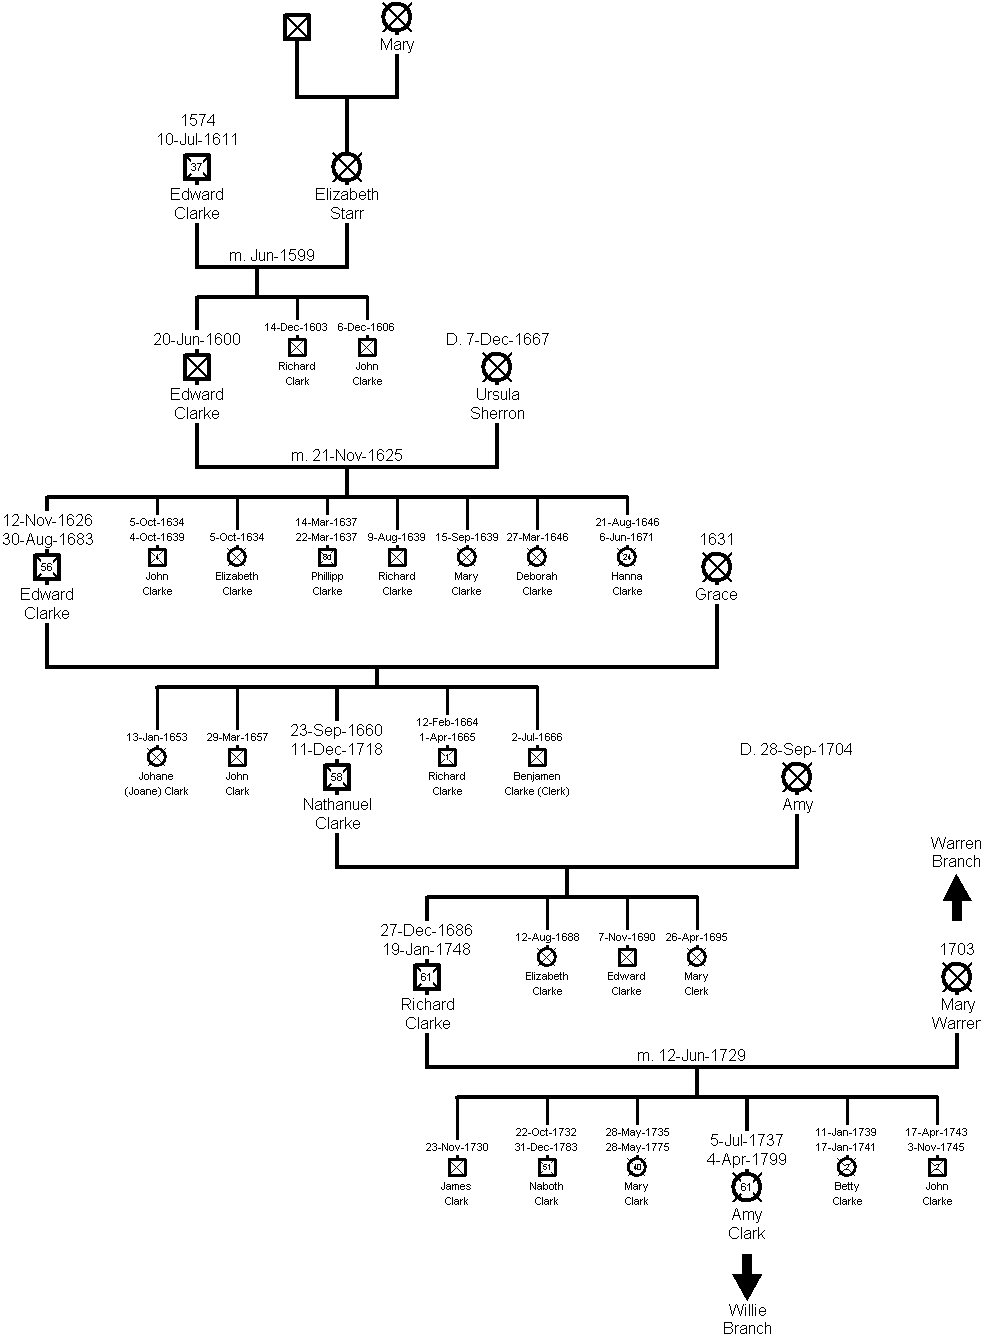 Family Tree of the Clarke Branch